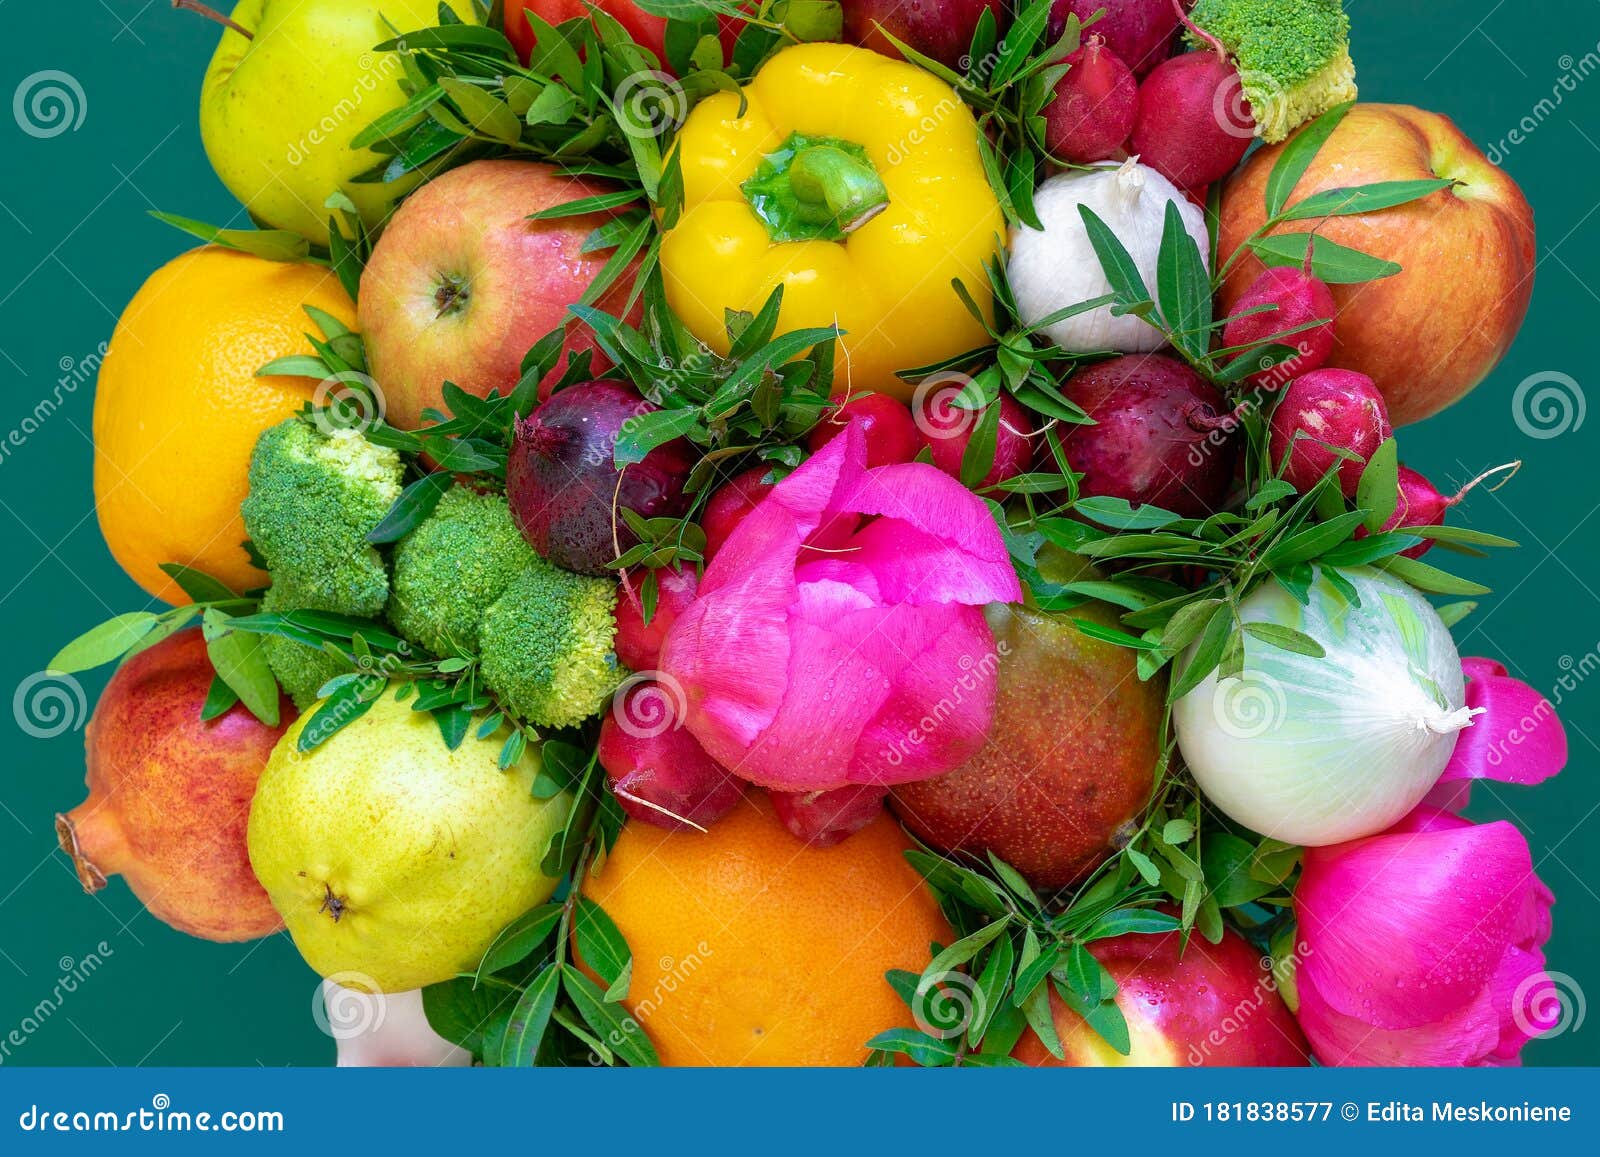 Composition With Fruits, Vegetables And And Flowers Stock Image - Image Of  Fresh, Lifestyle: 181838577